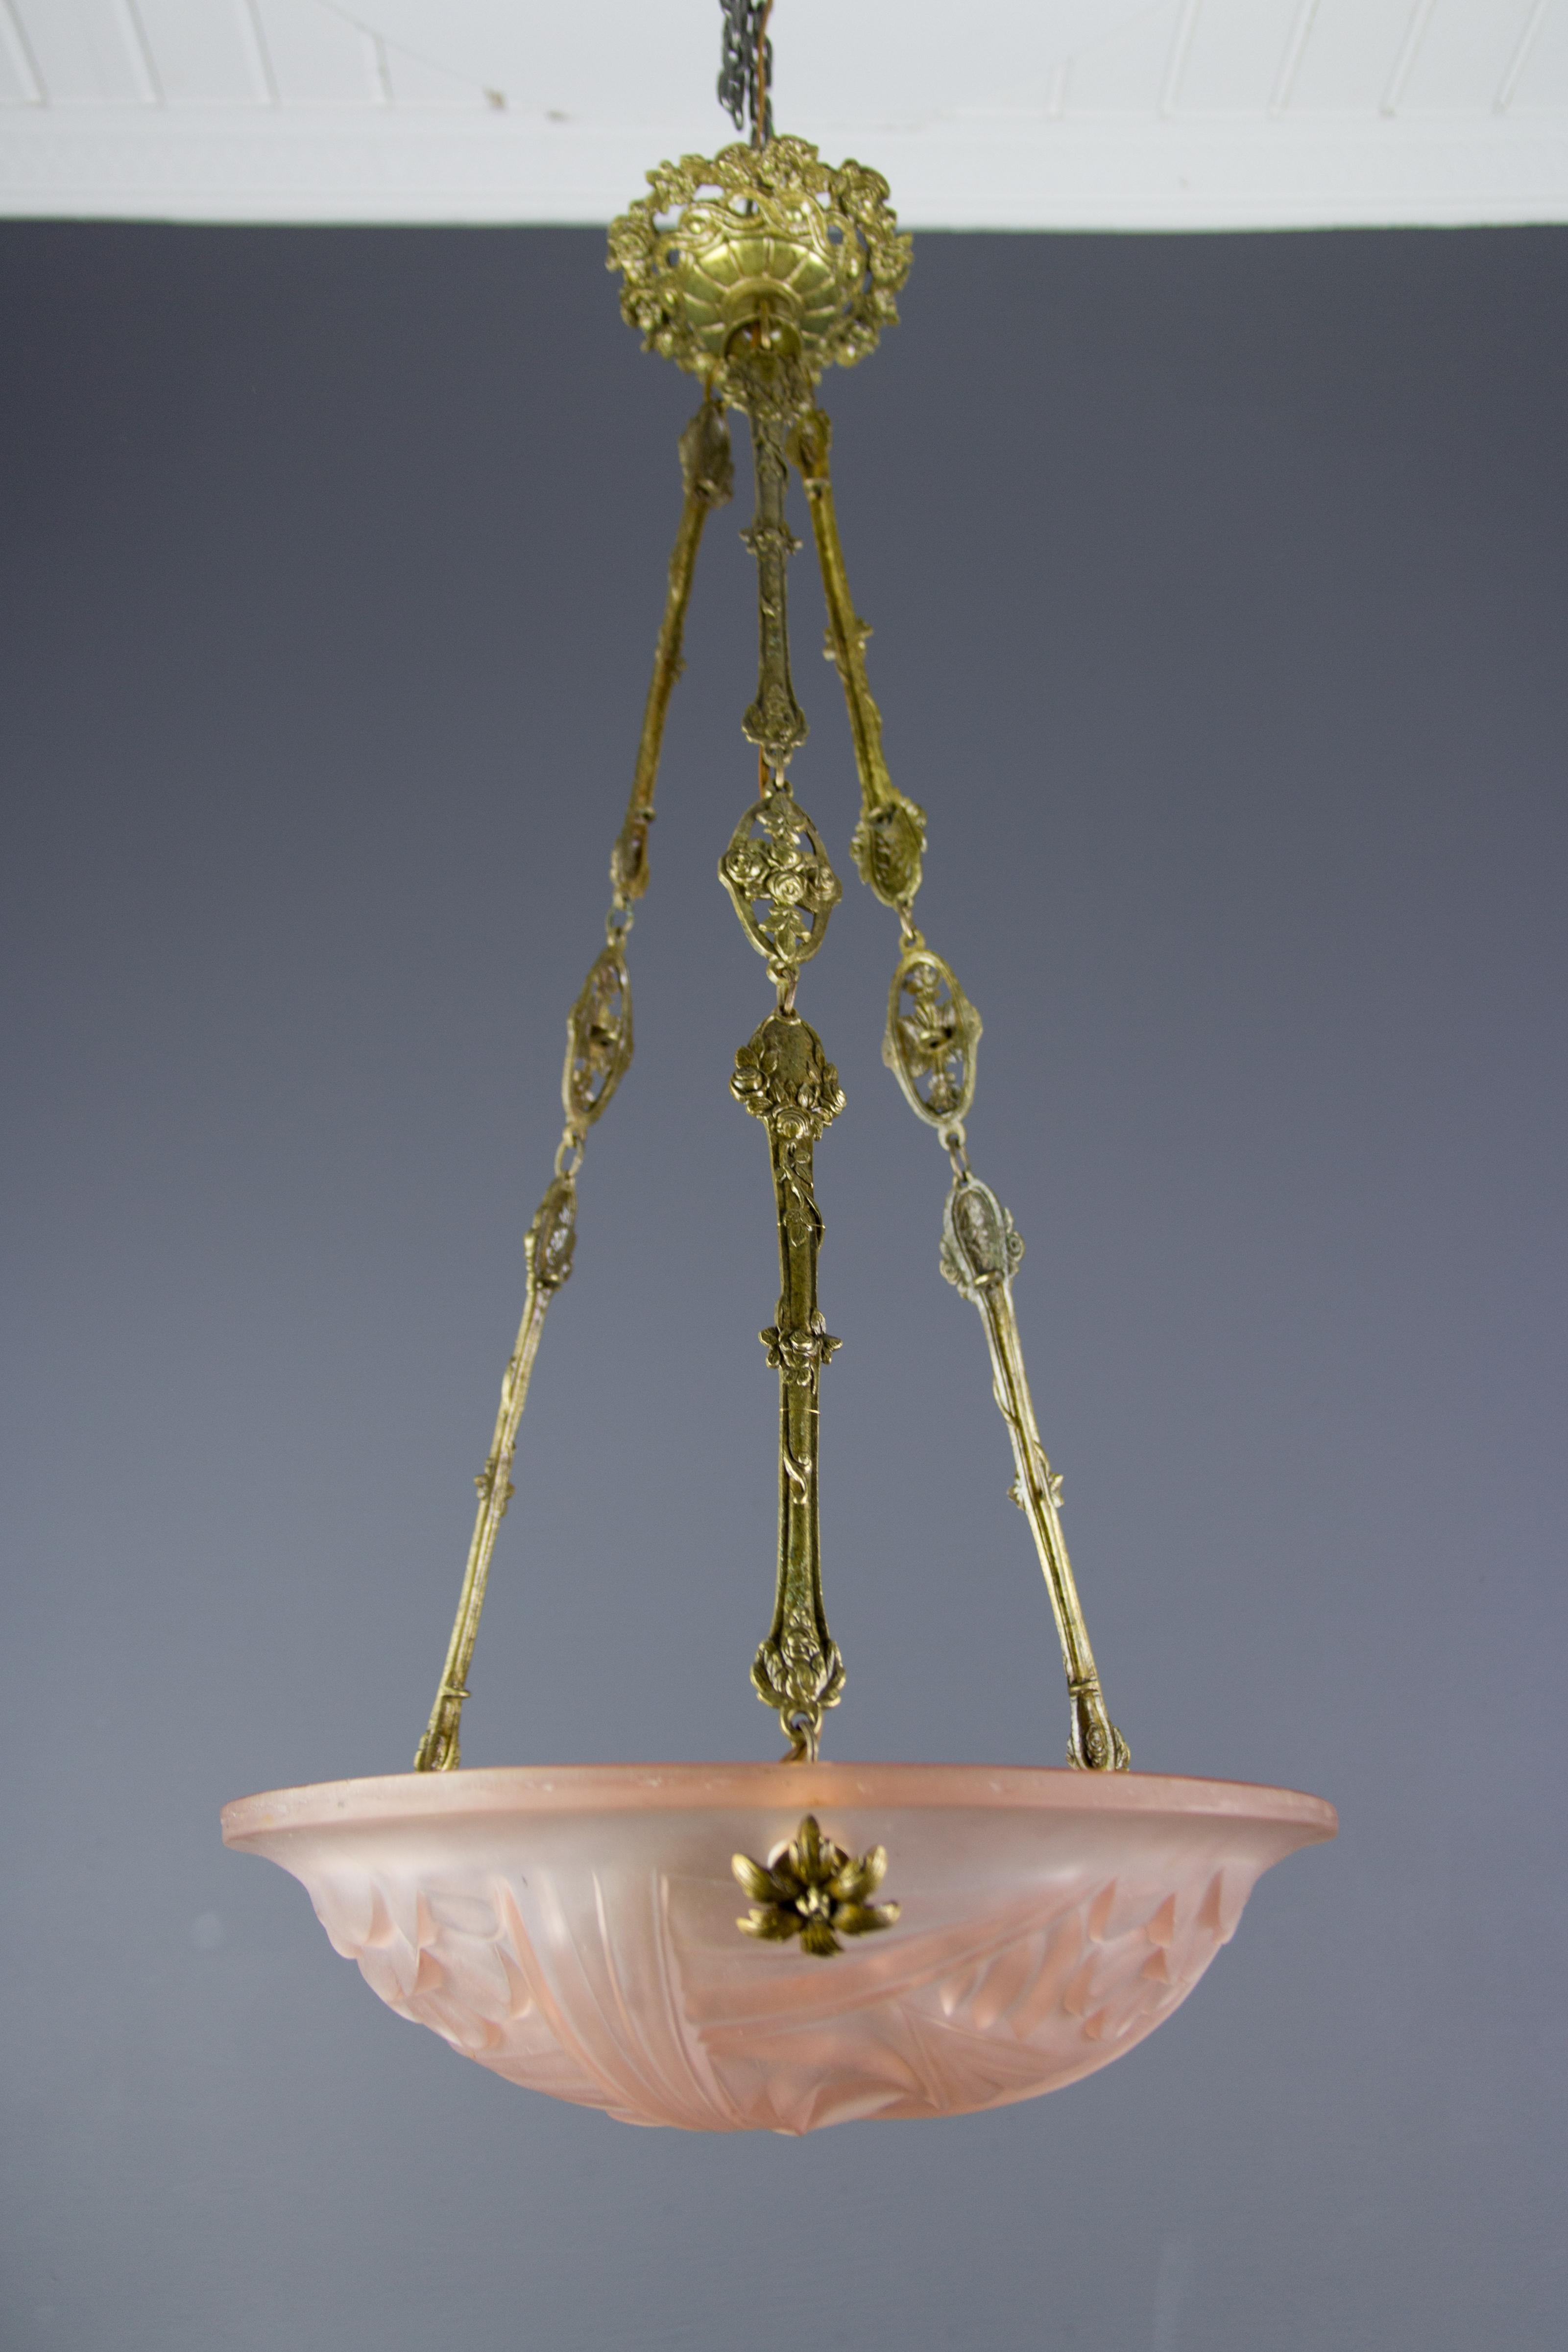 Beautiful French Art Deco pendant light/chandelier with frosted pressed glass shade by Degué, founded by David Guéron (1892 -1950), who specialized in luxury glassware including chandeliers. Beautifully shaped light pink glass bowl features stylized